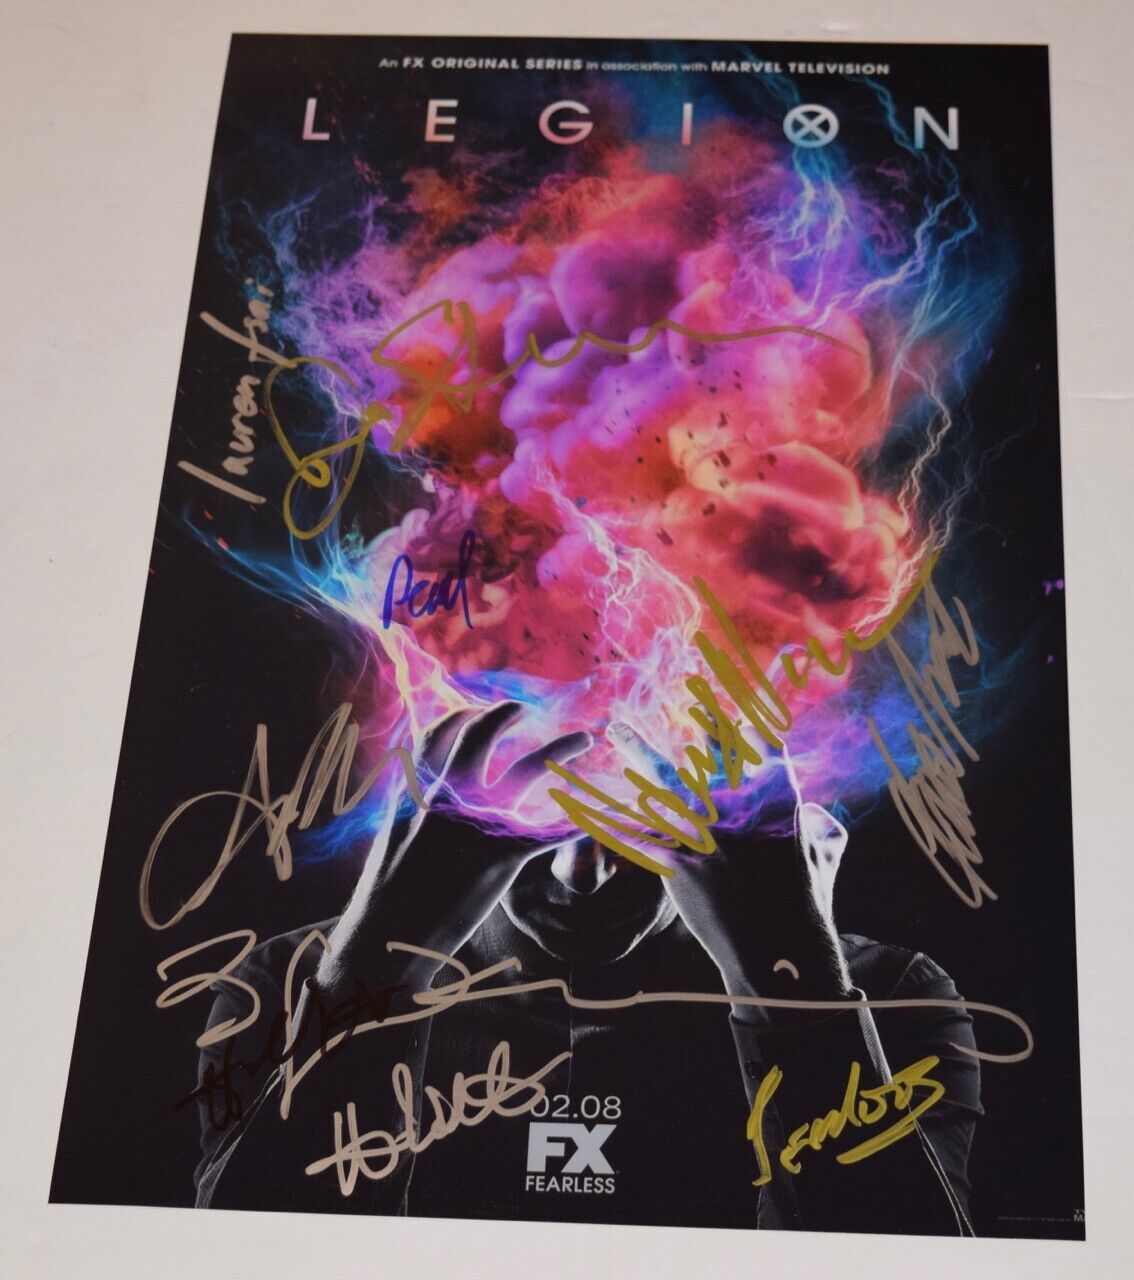 LEGION Signed Autographed 11x17 Photo Poster painting Poster 2019 Cast by 10 Dan Stevens COA